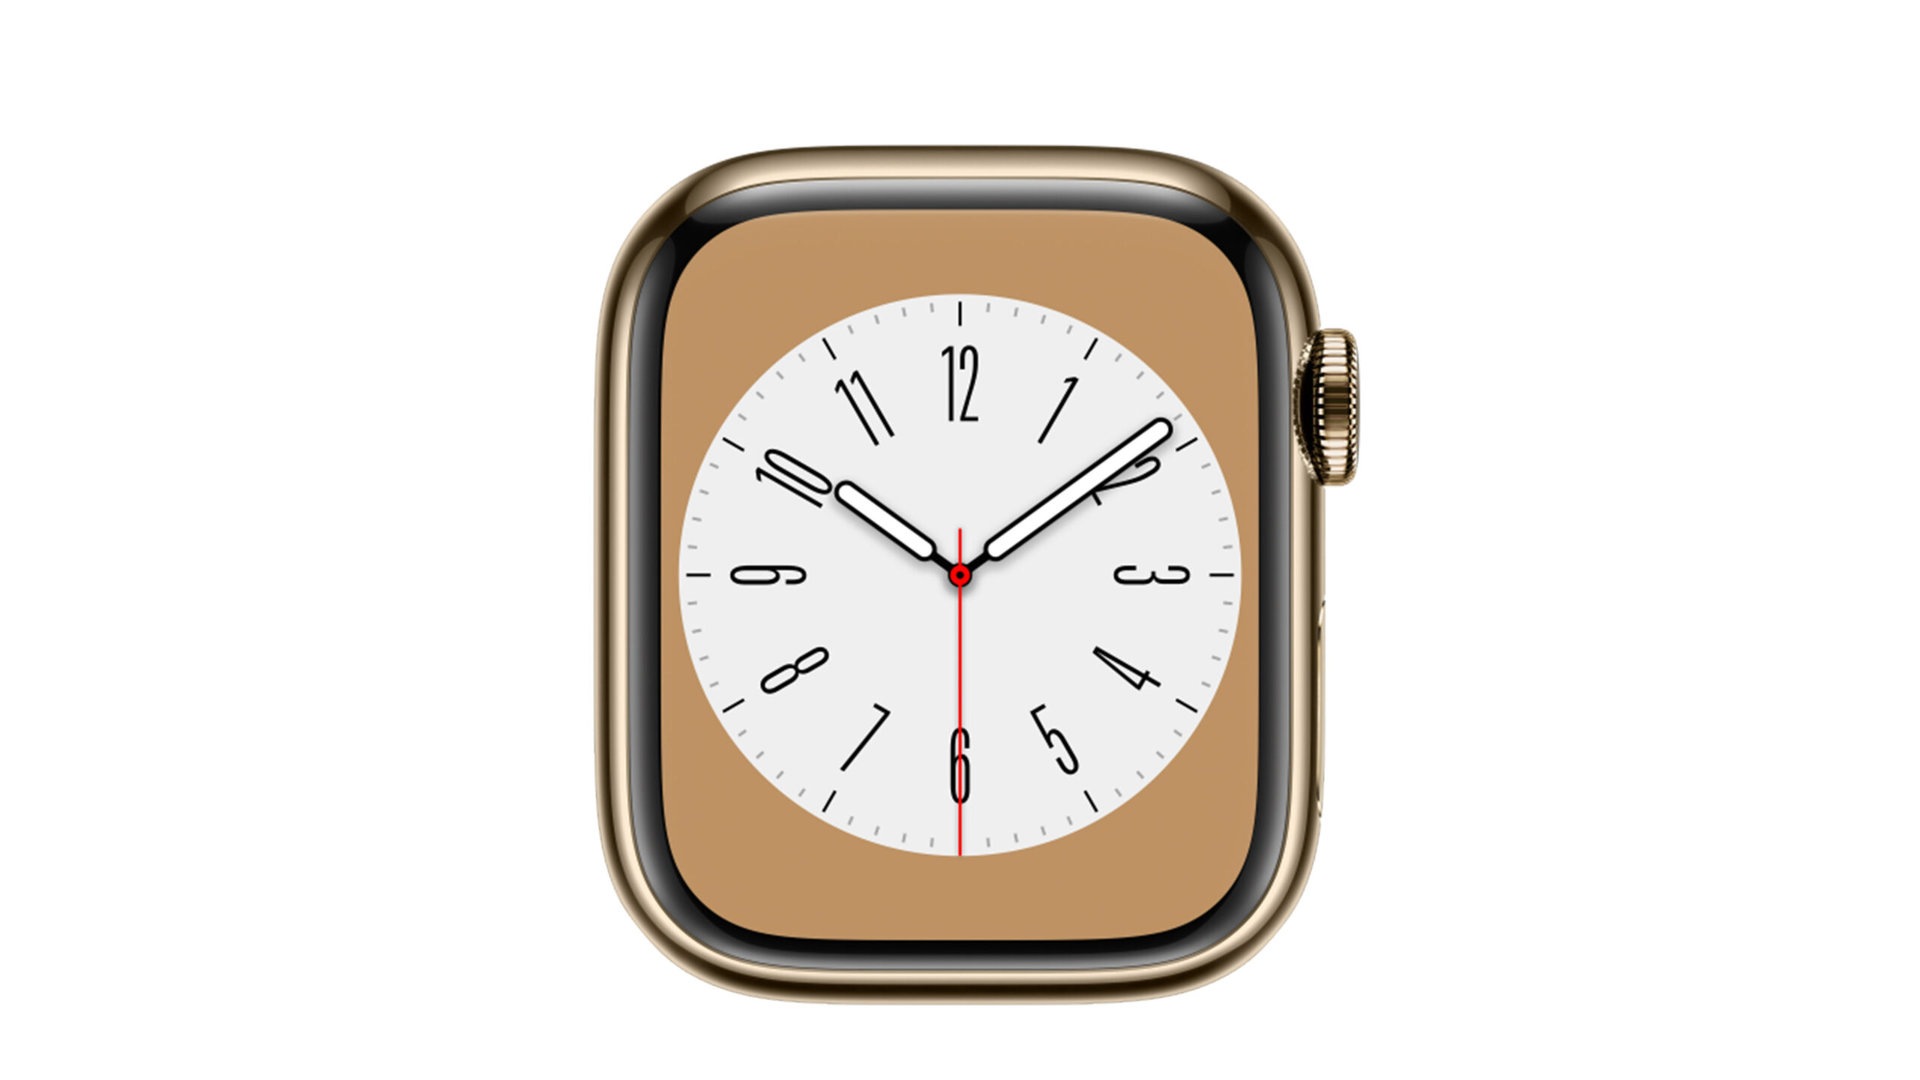 The stainless steel Gold case is especially upscale looking.